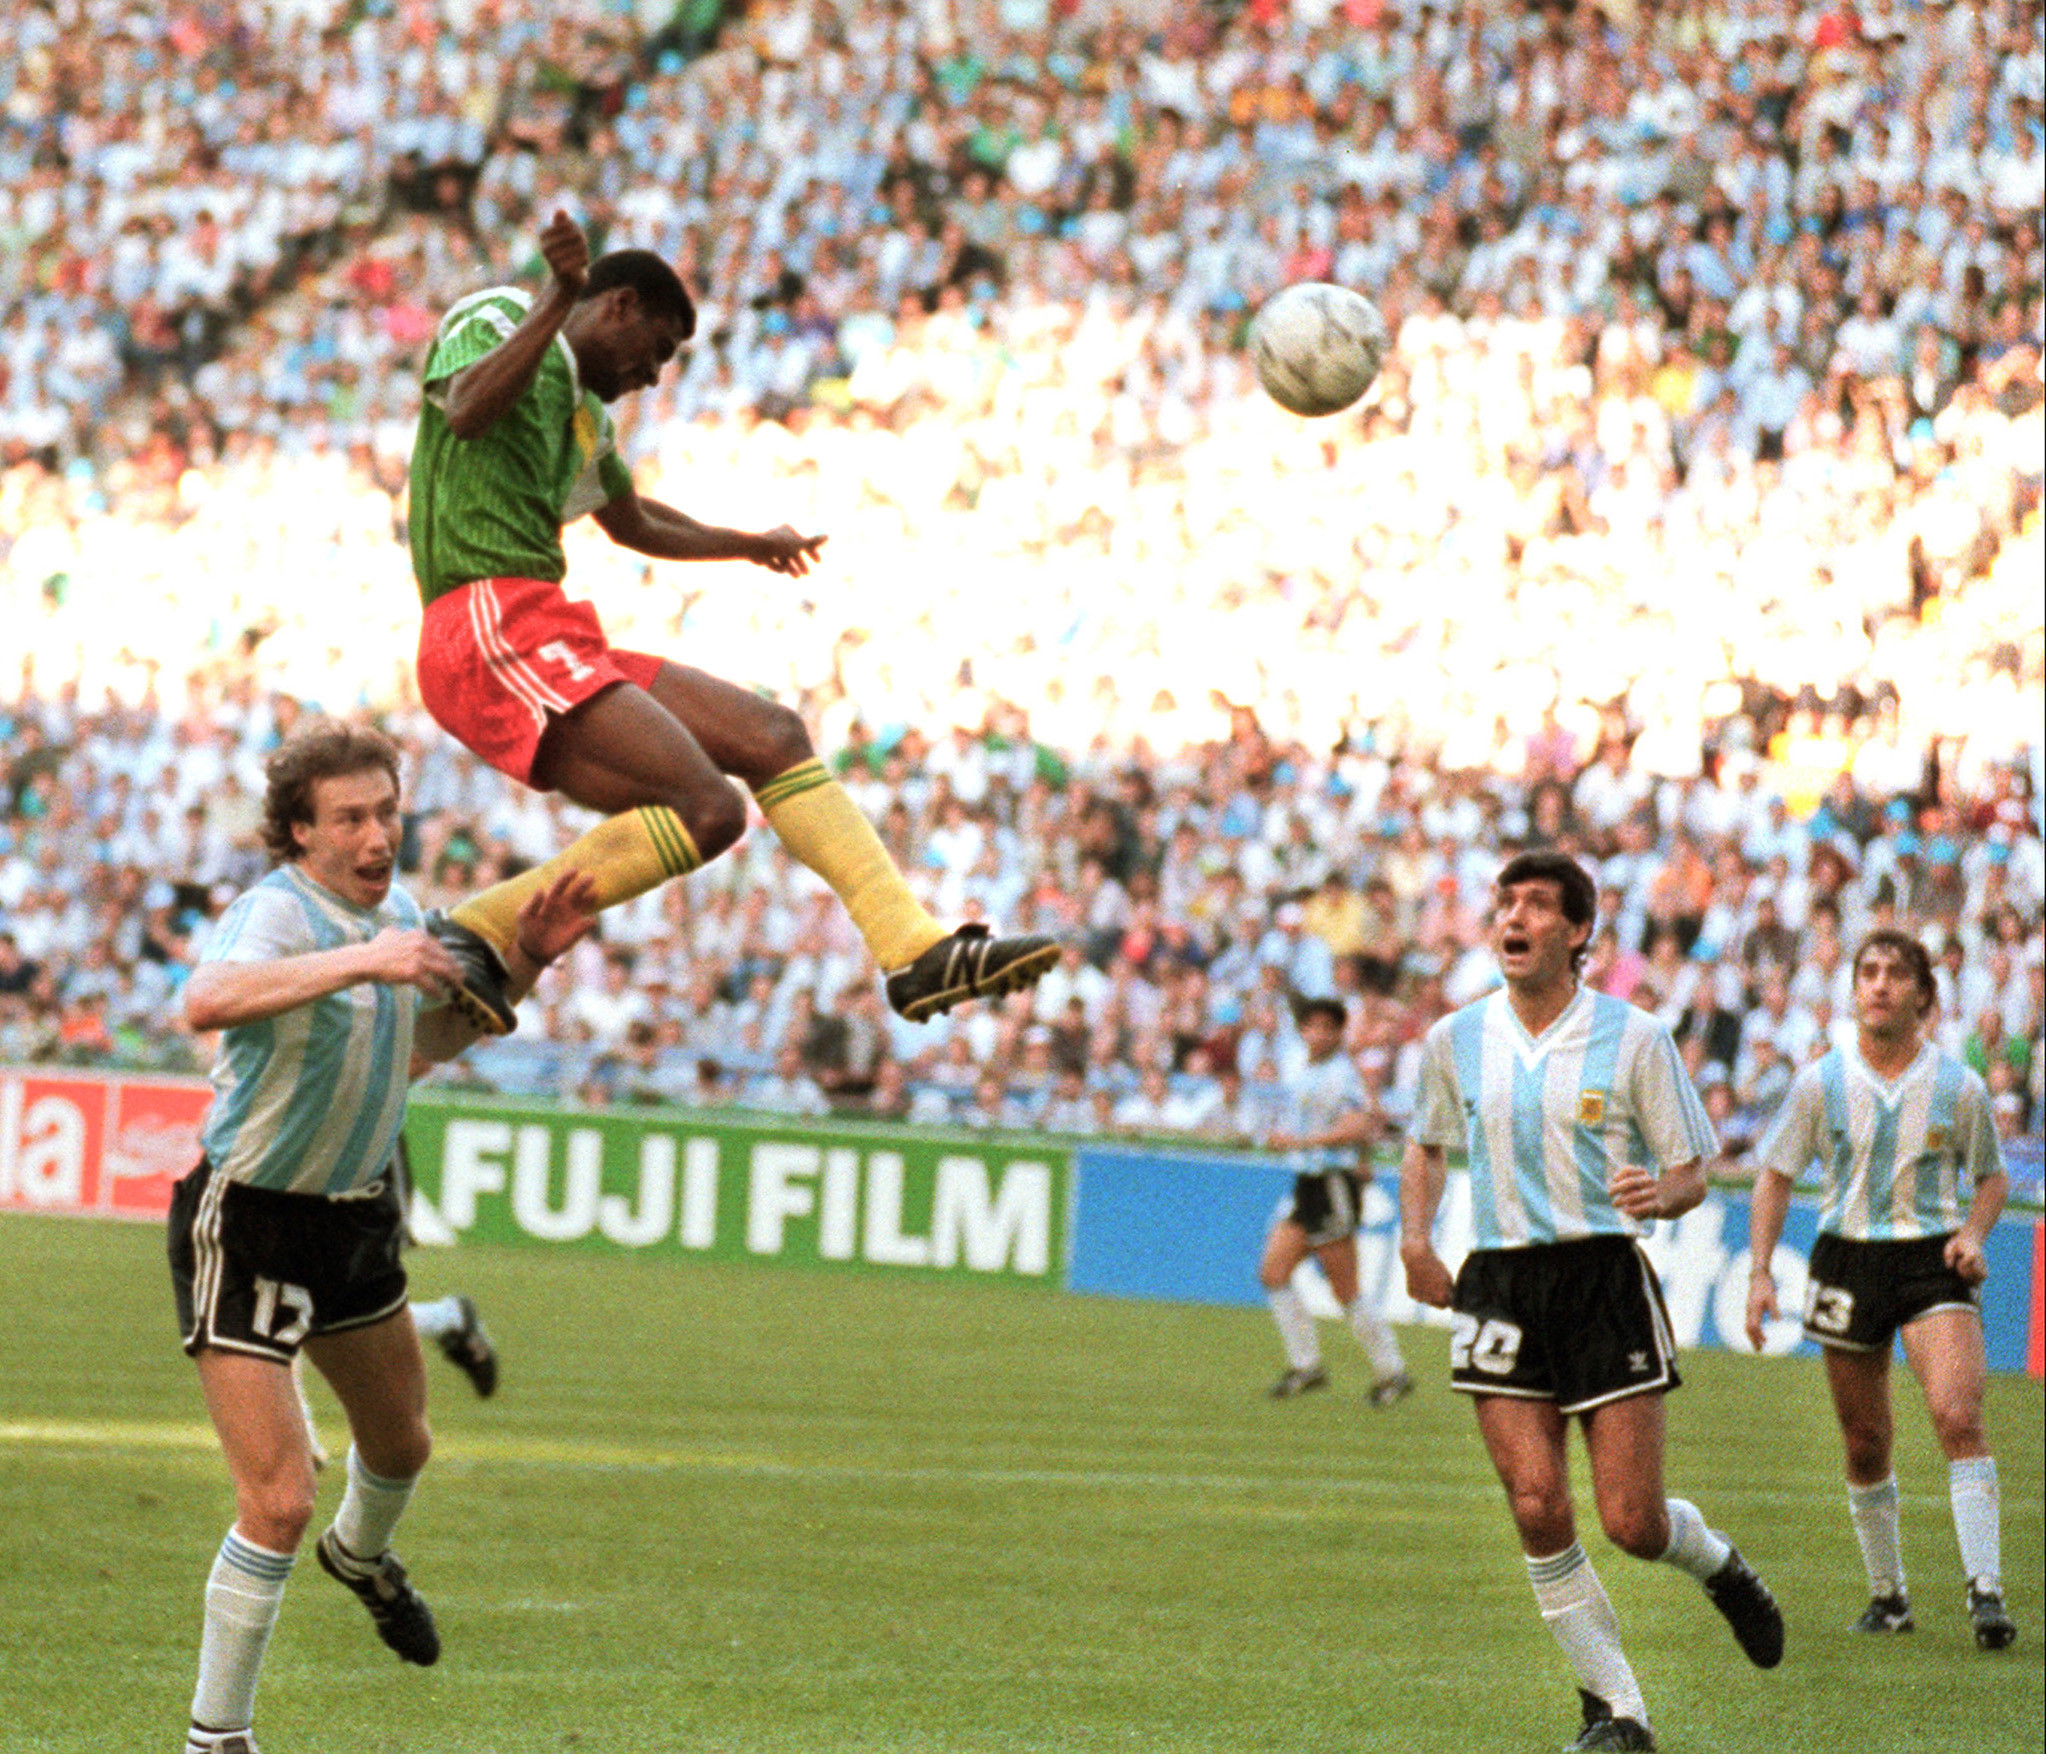 A shock for world champions Argentina in the opening match of Italia 90 when they were beaten 1-0 by Cameroon ©Getty Images